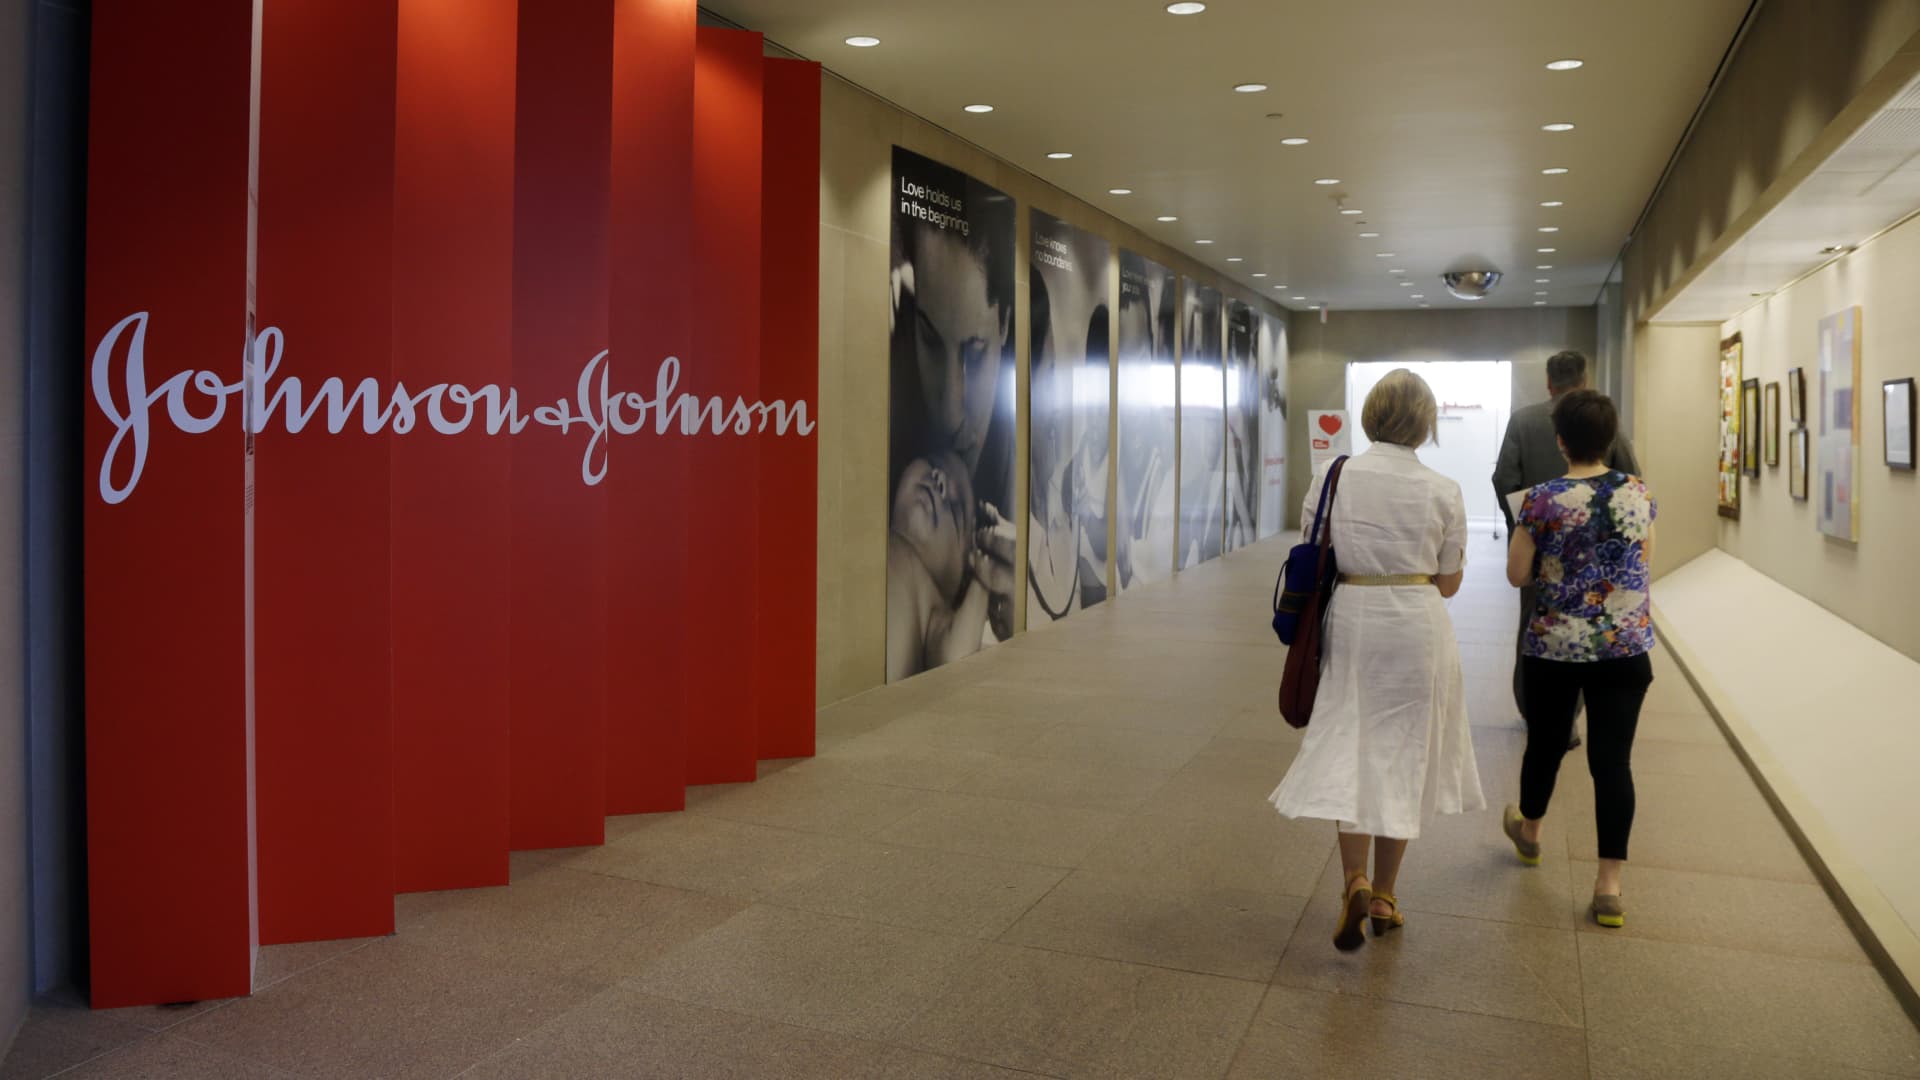 J&J’s nearly $17 billion offer for Abiomed goes right to why we own it